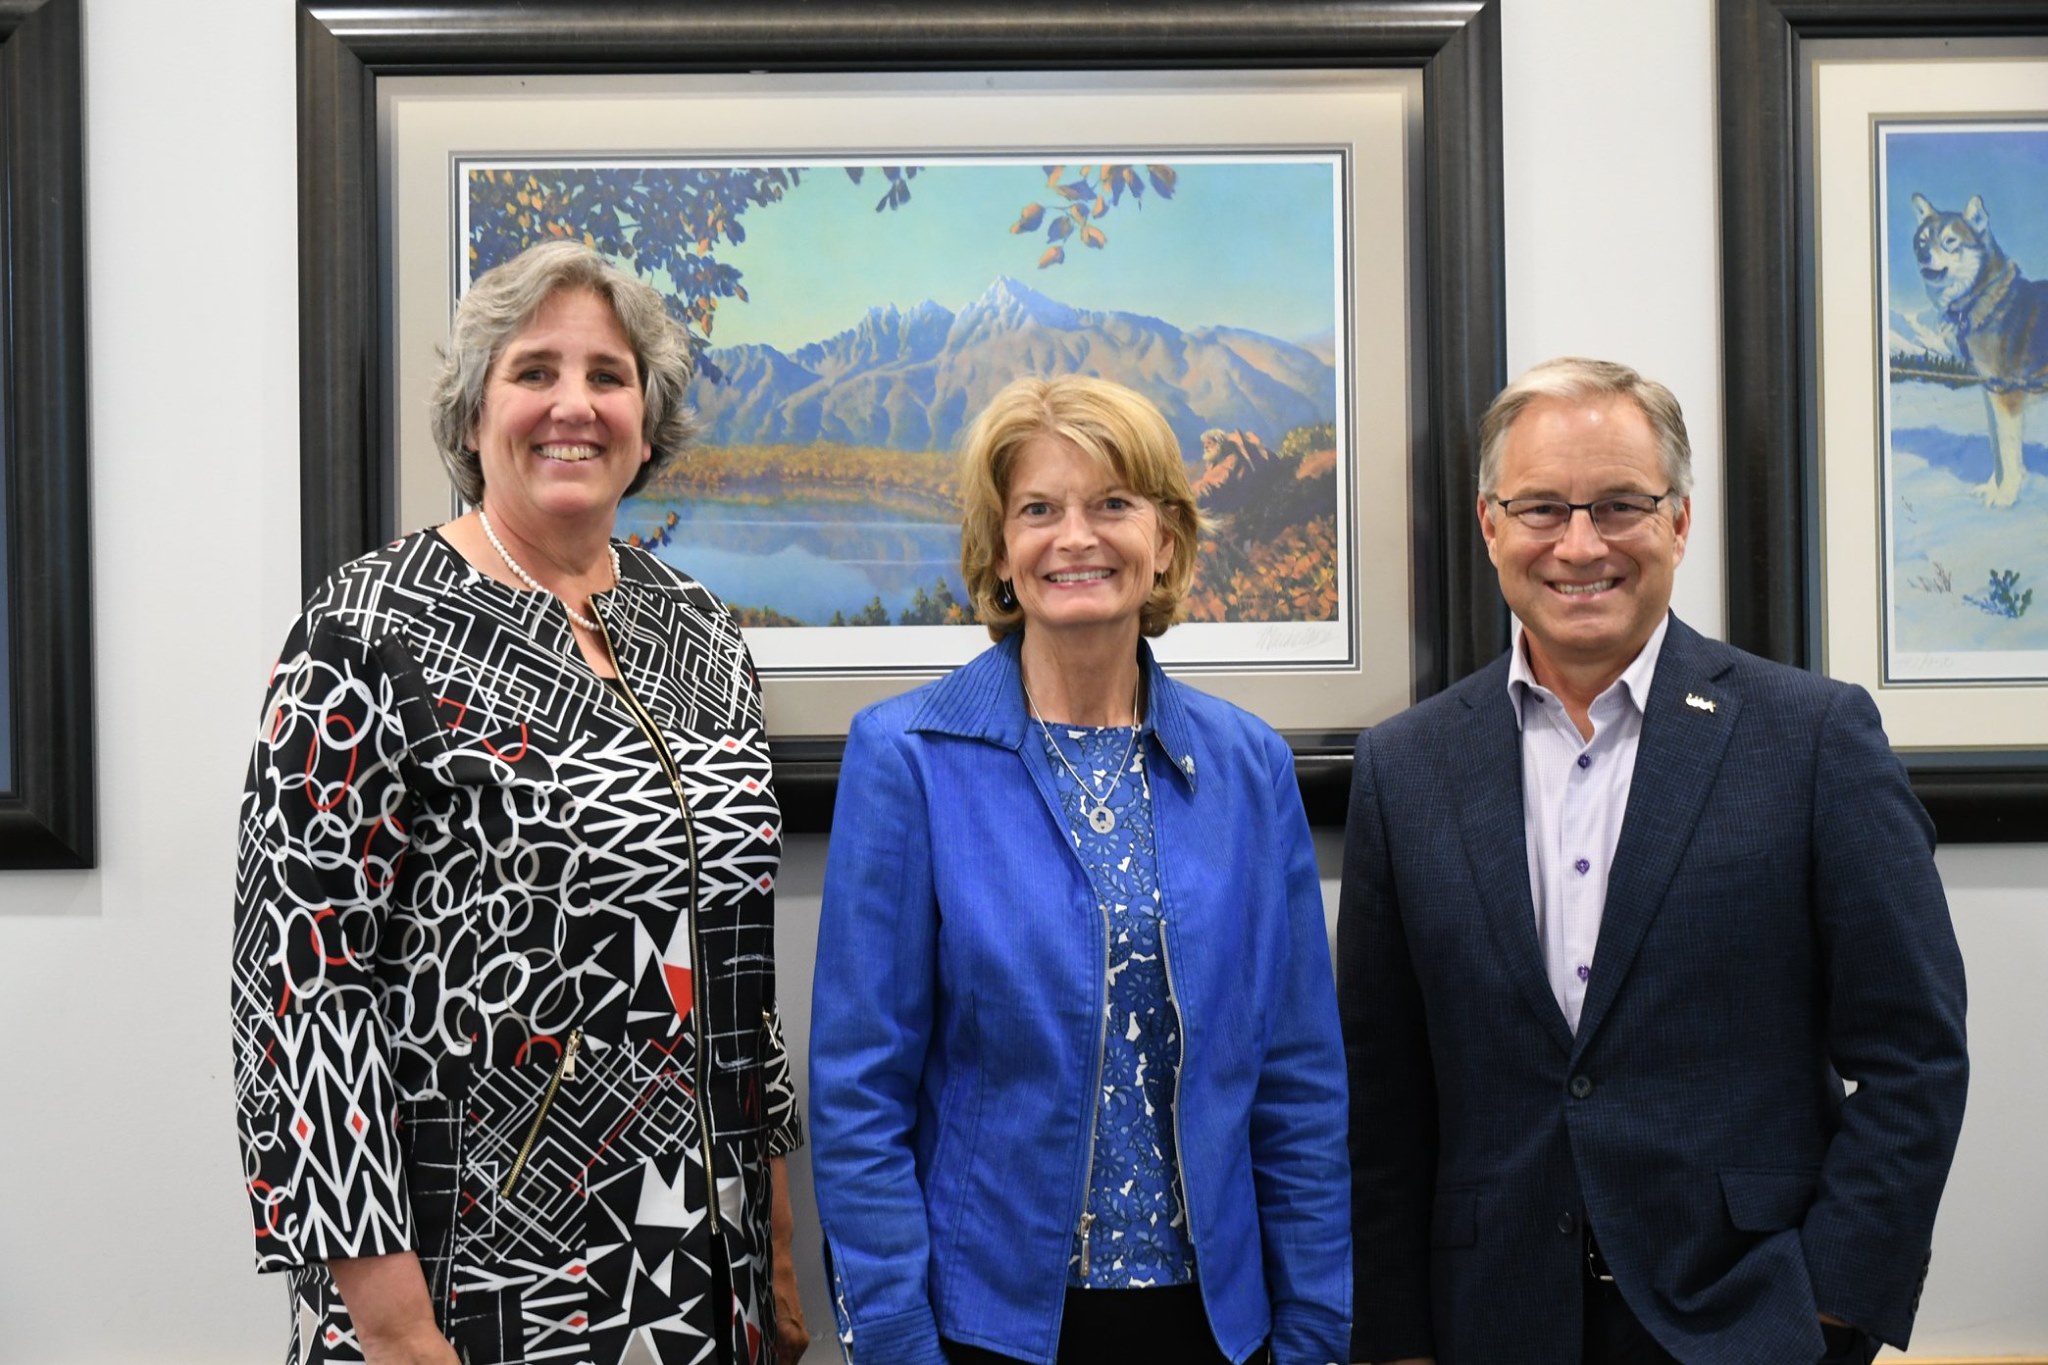 Murkowski with Pitney and Parnell